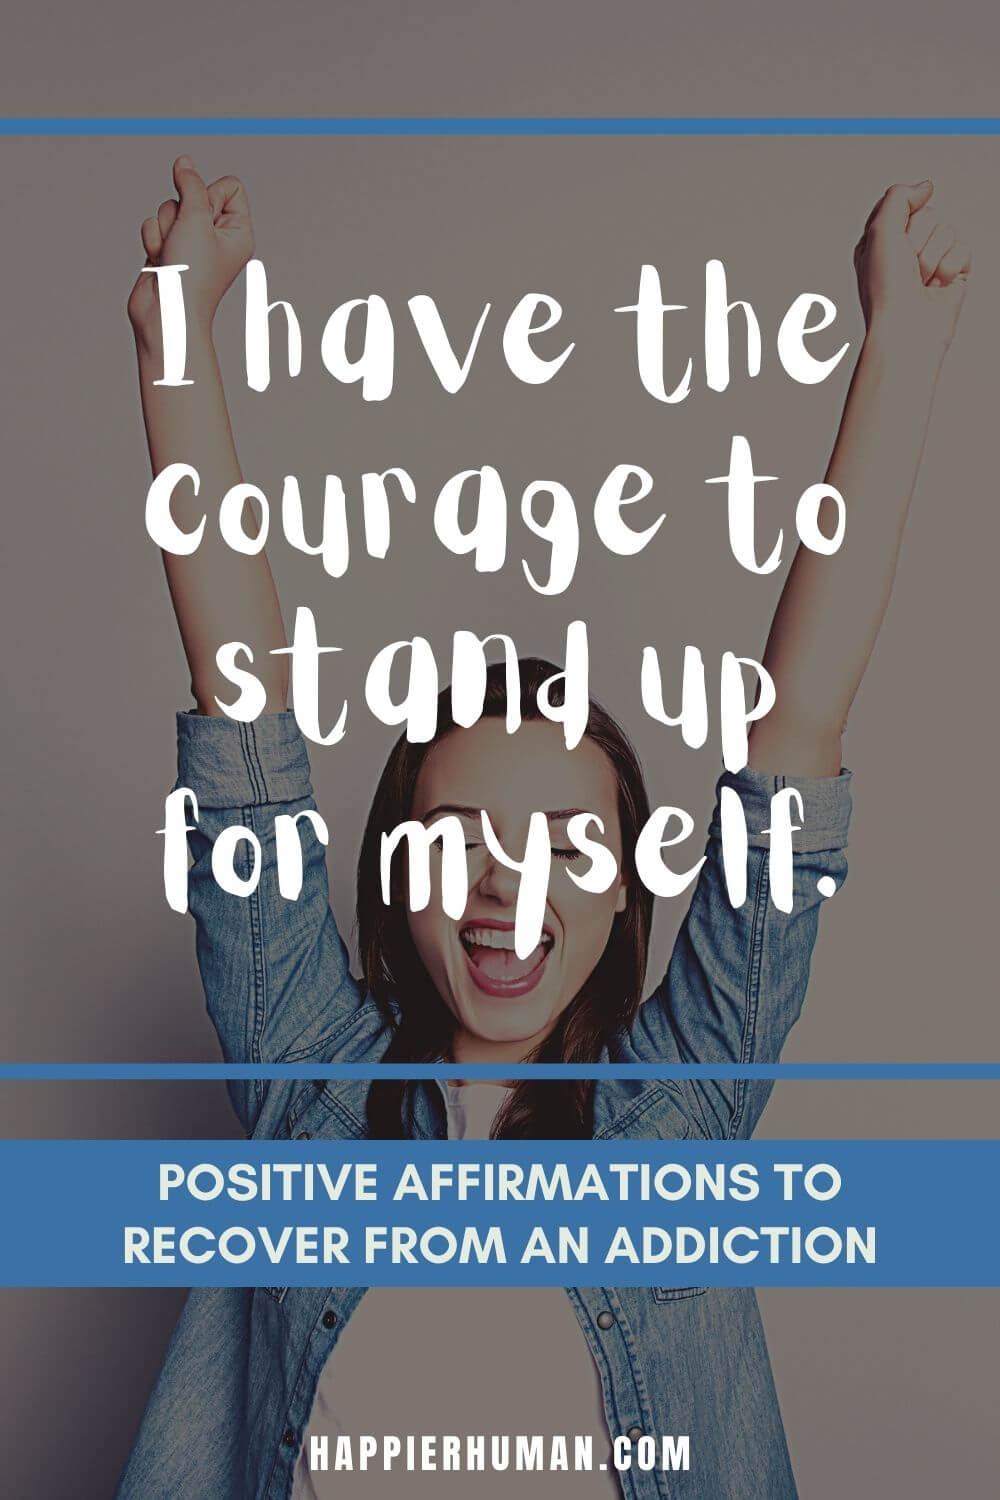 Affirmations for Addiction - I have the courage to stand up for myself. | affirmations for gambling addiction | affirmations for social media addiction | affirmations for love addiction